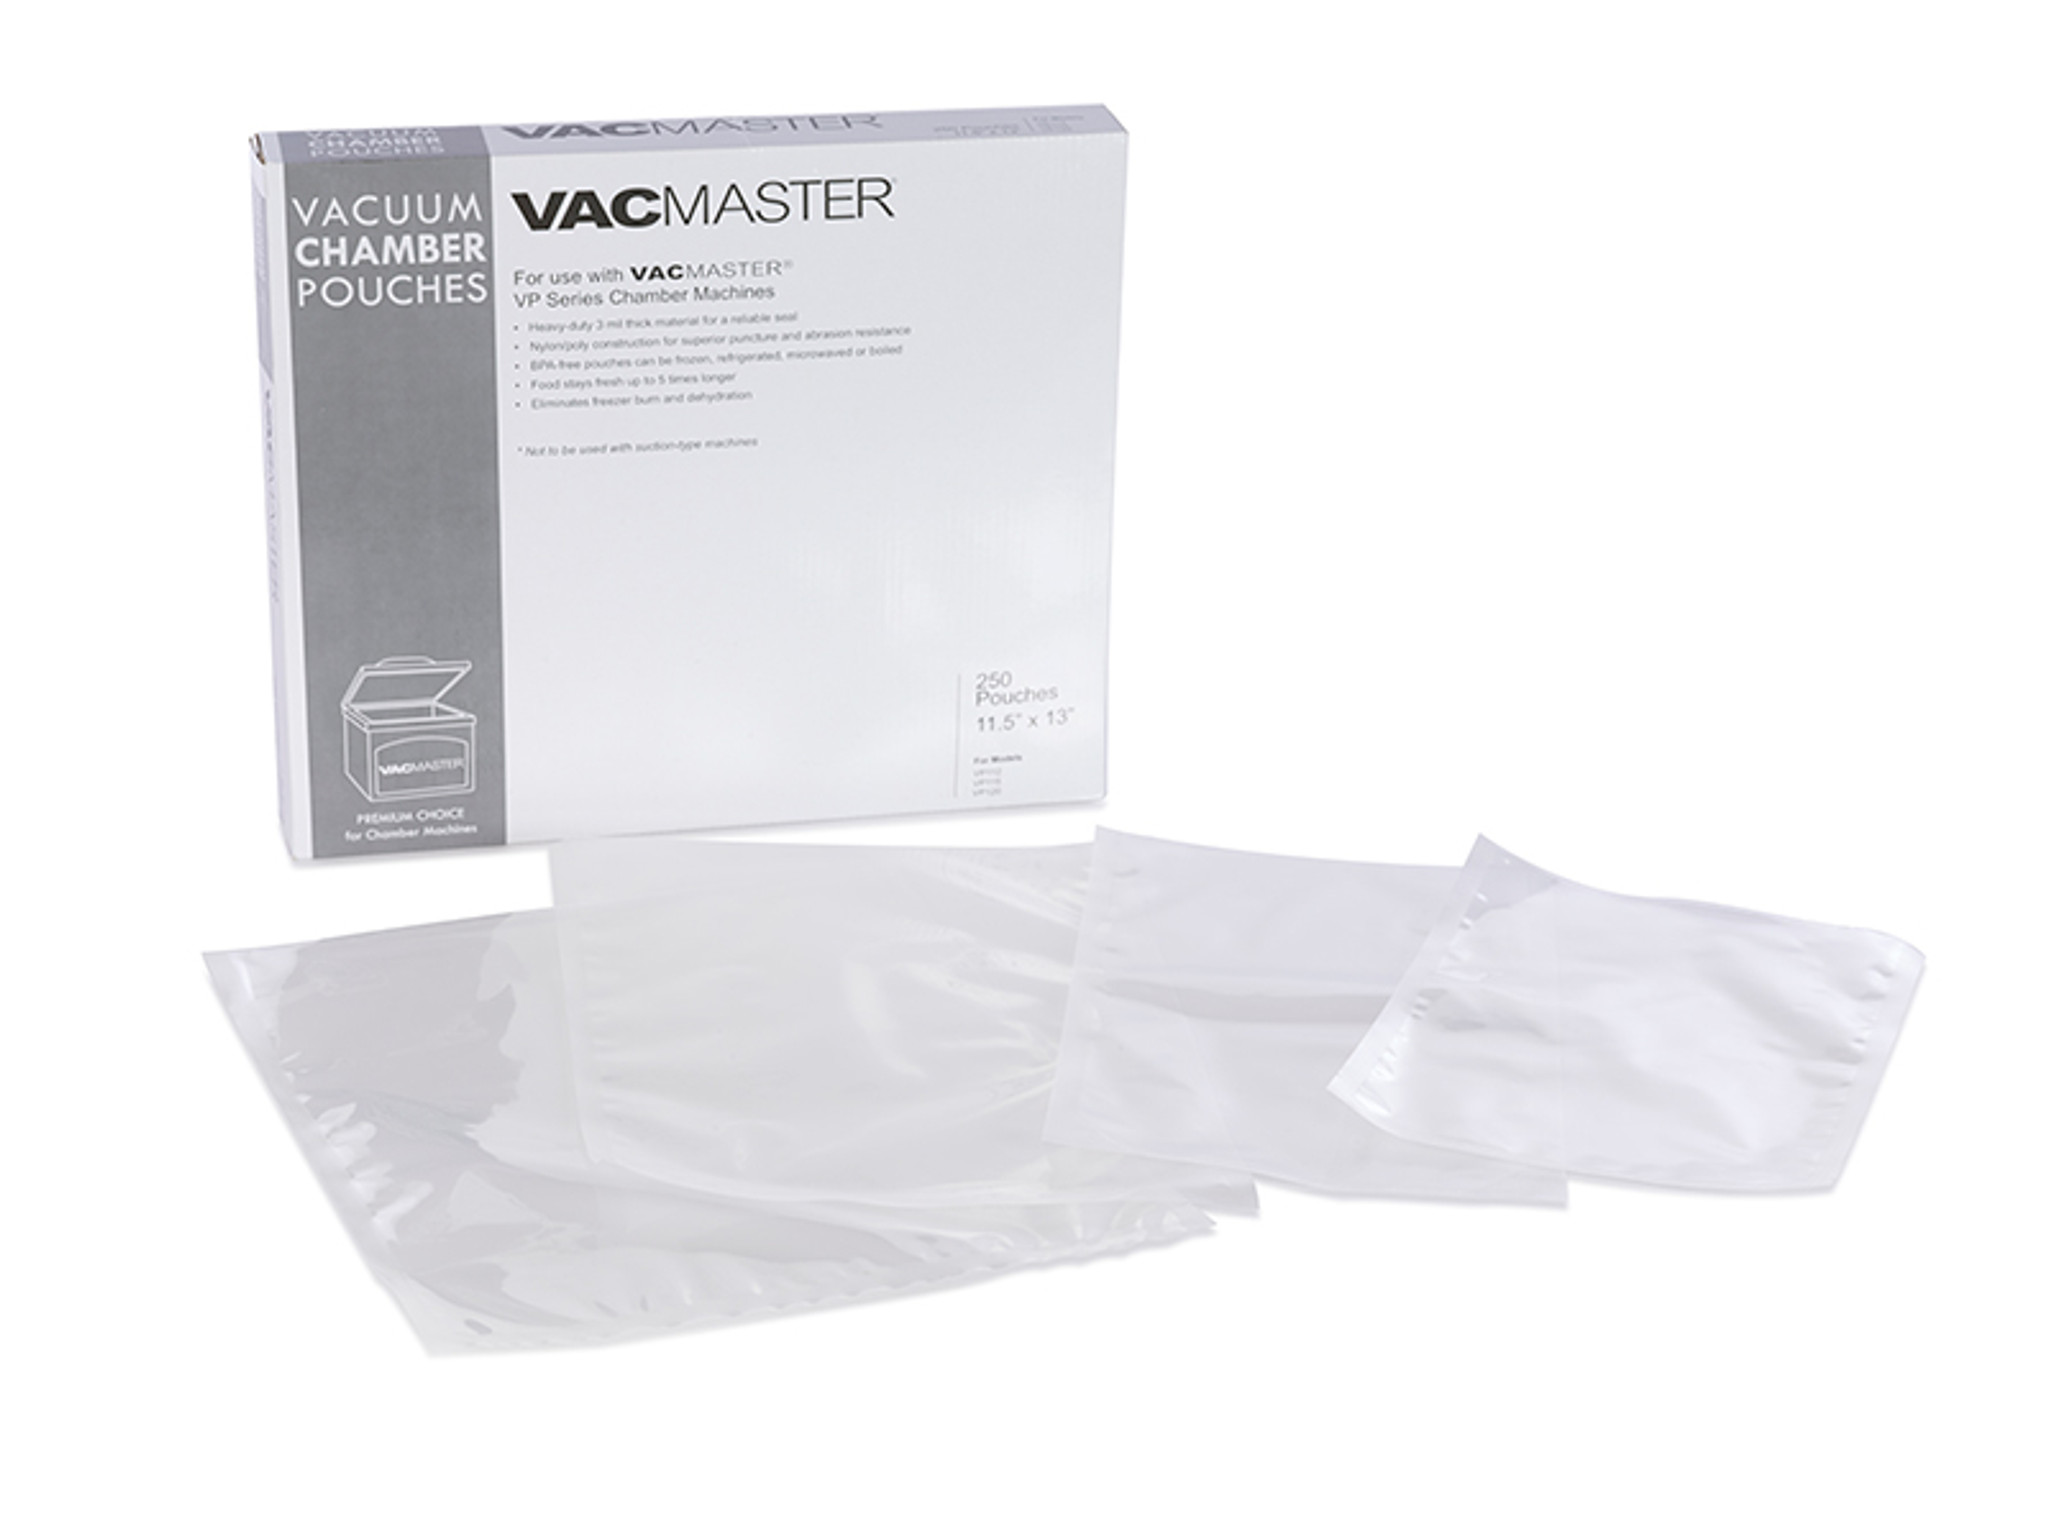 Invoibler 12 Pcs Multiple Sizes Vacuum Storage Bags with Pump